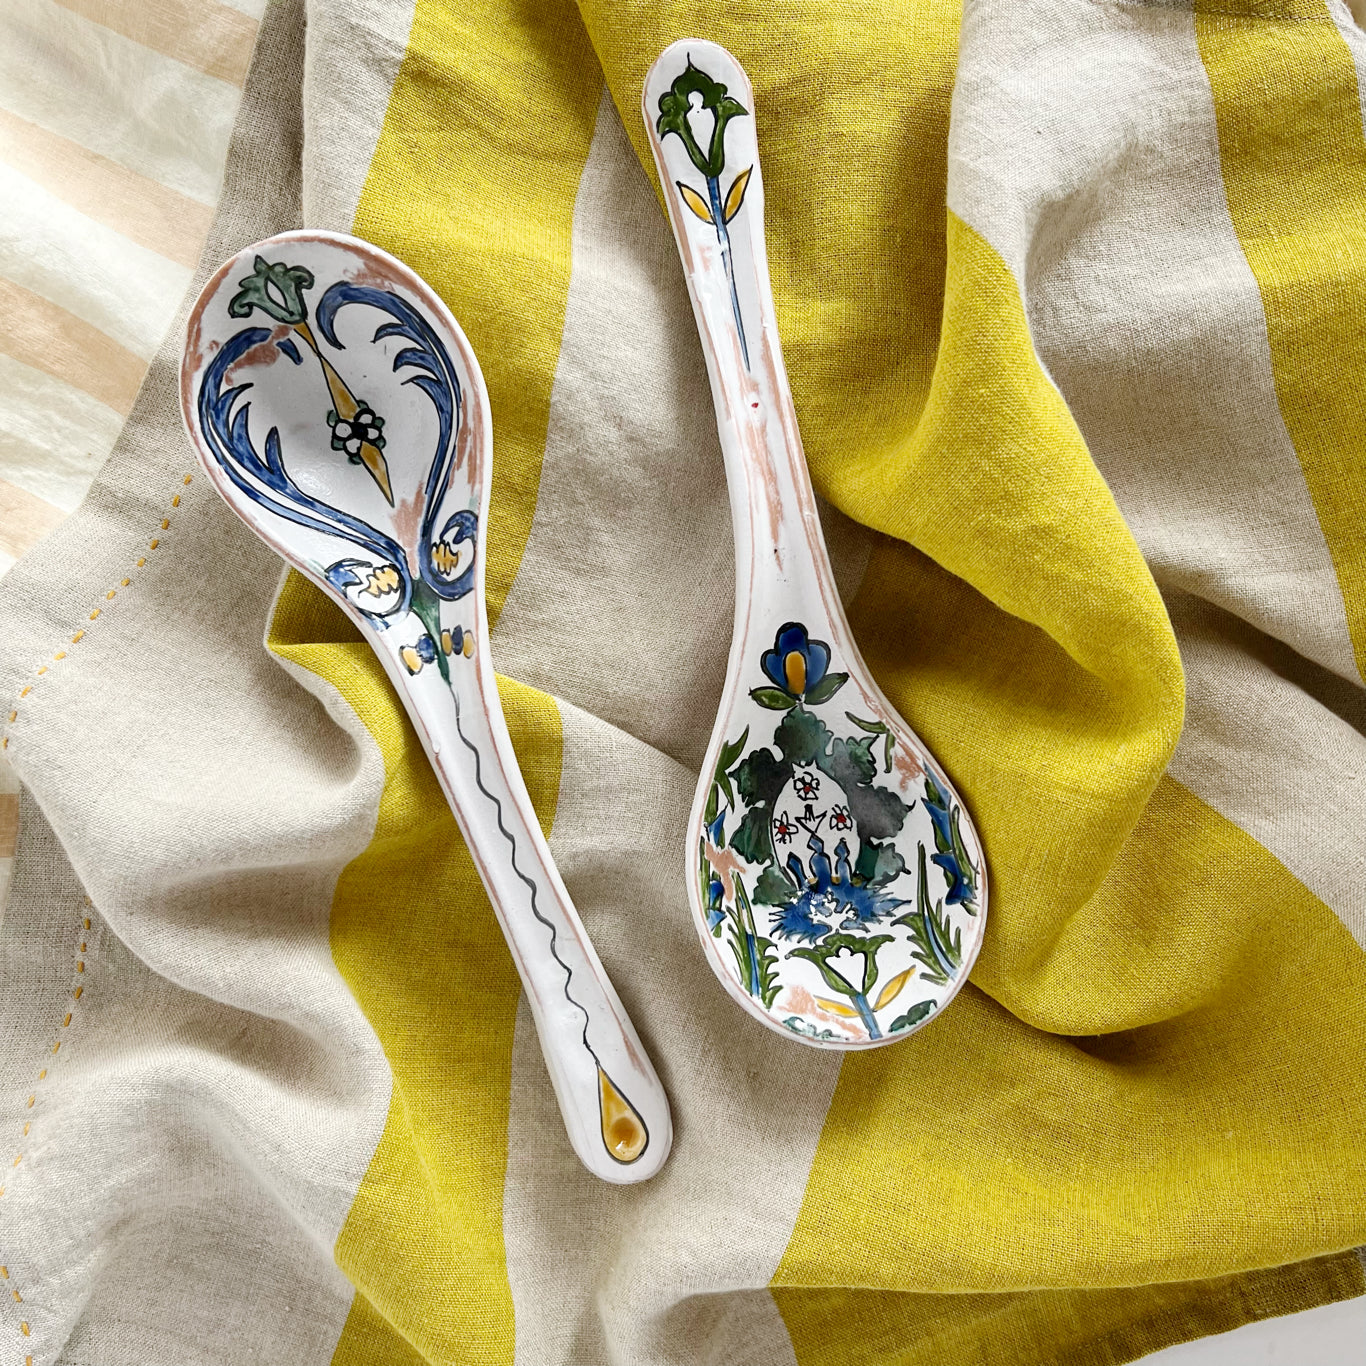 vintage inspired kitchen accessory spoon rests